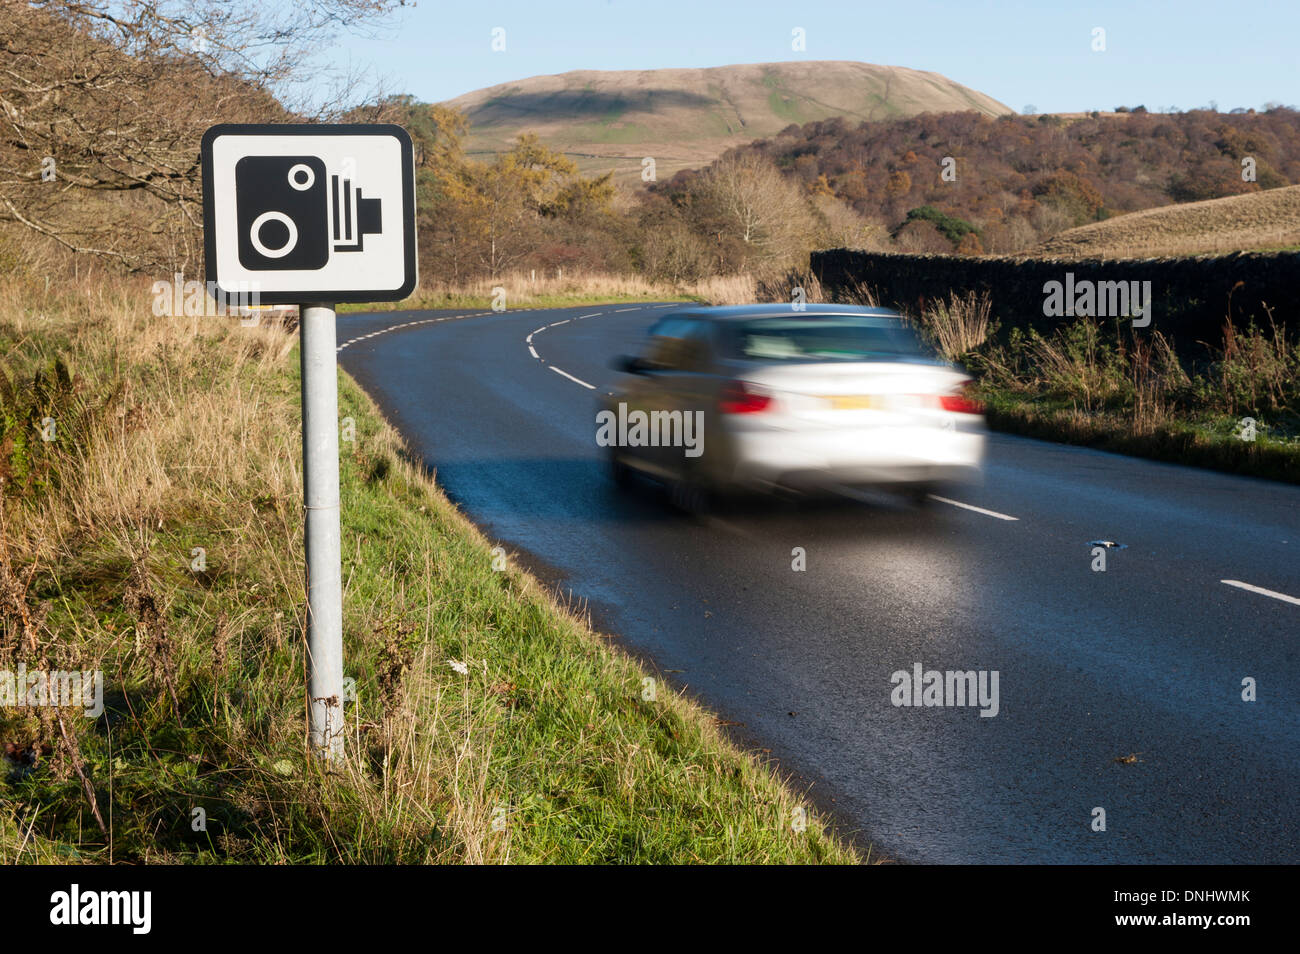 Car on rural road going past a speed camera warning sign. Cumbria, UK Stock Photo